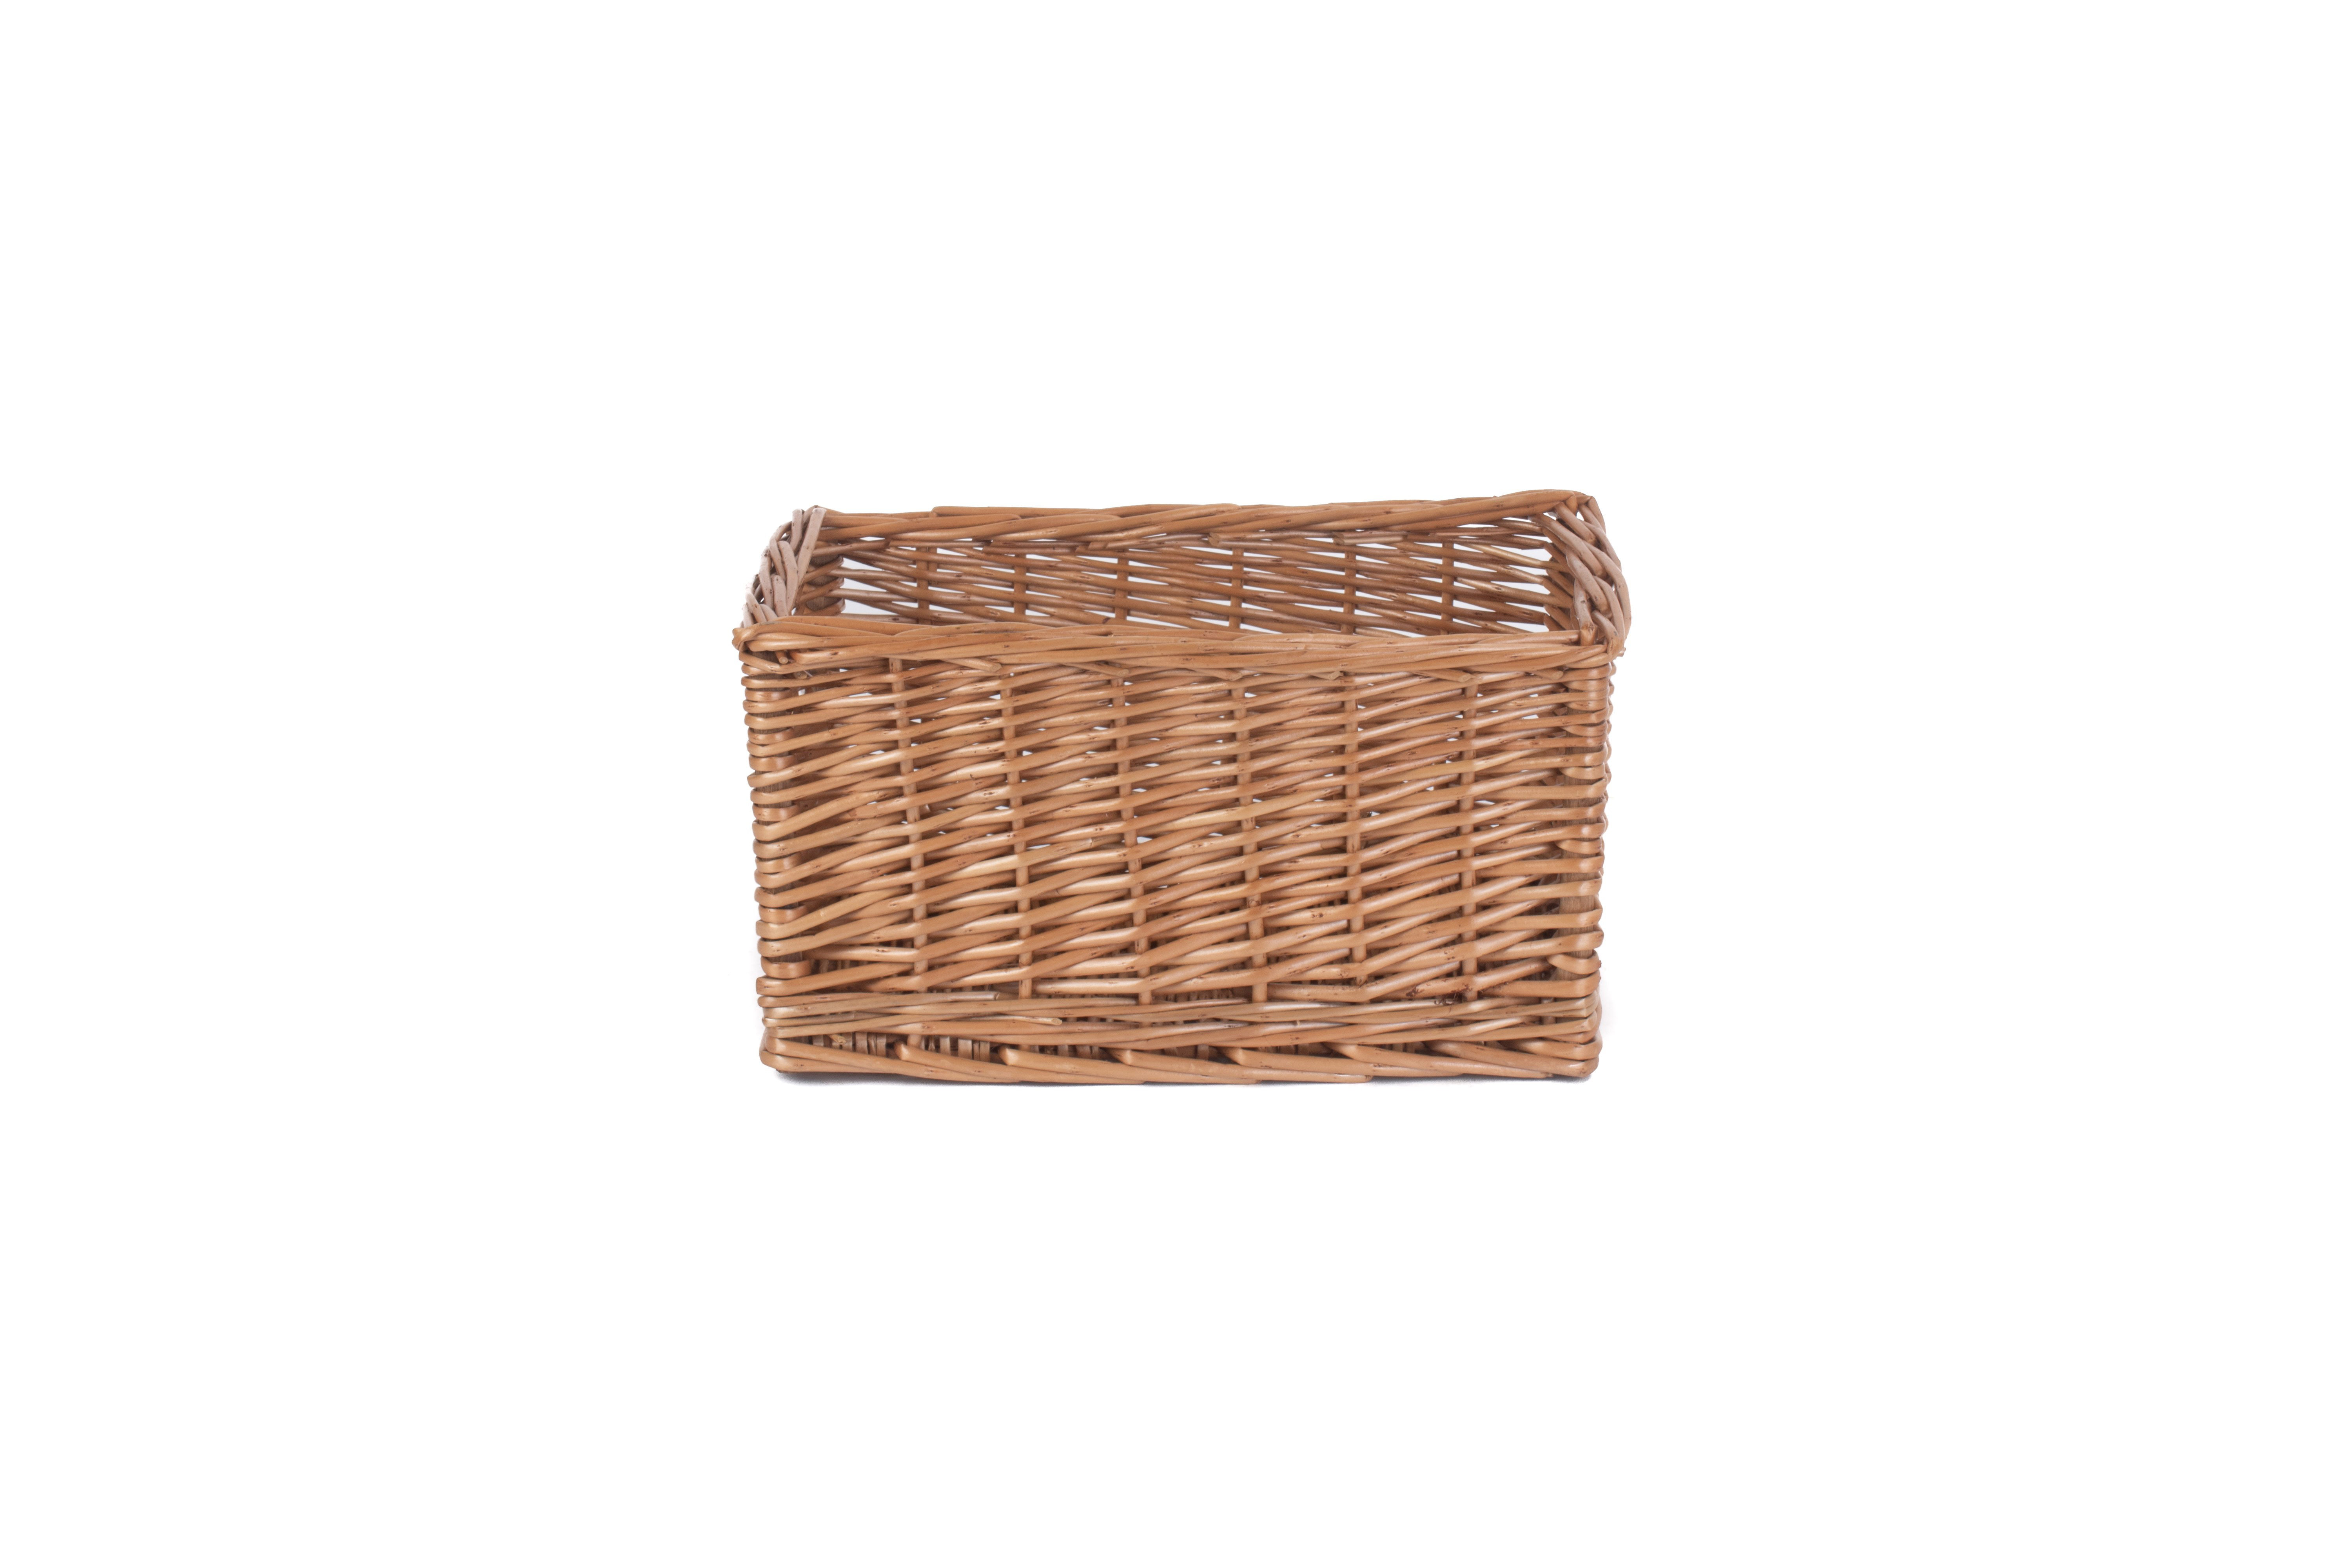 Windermere Wicker Lined Storage Basket - The Basket Comp[any